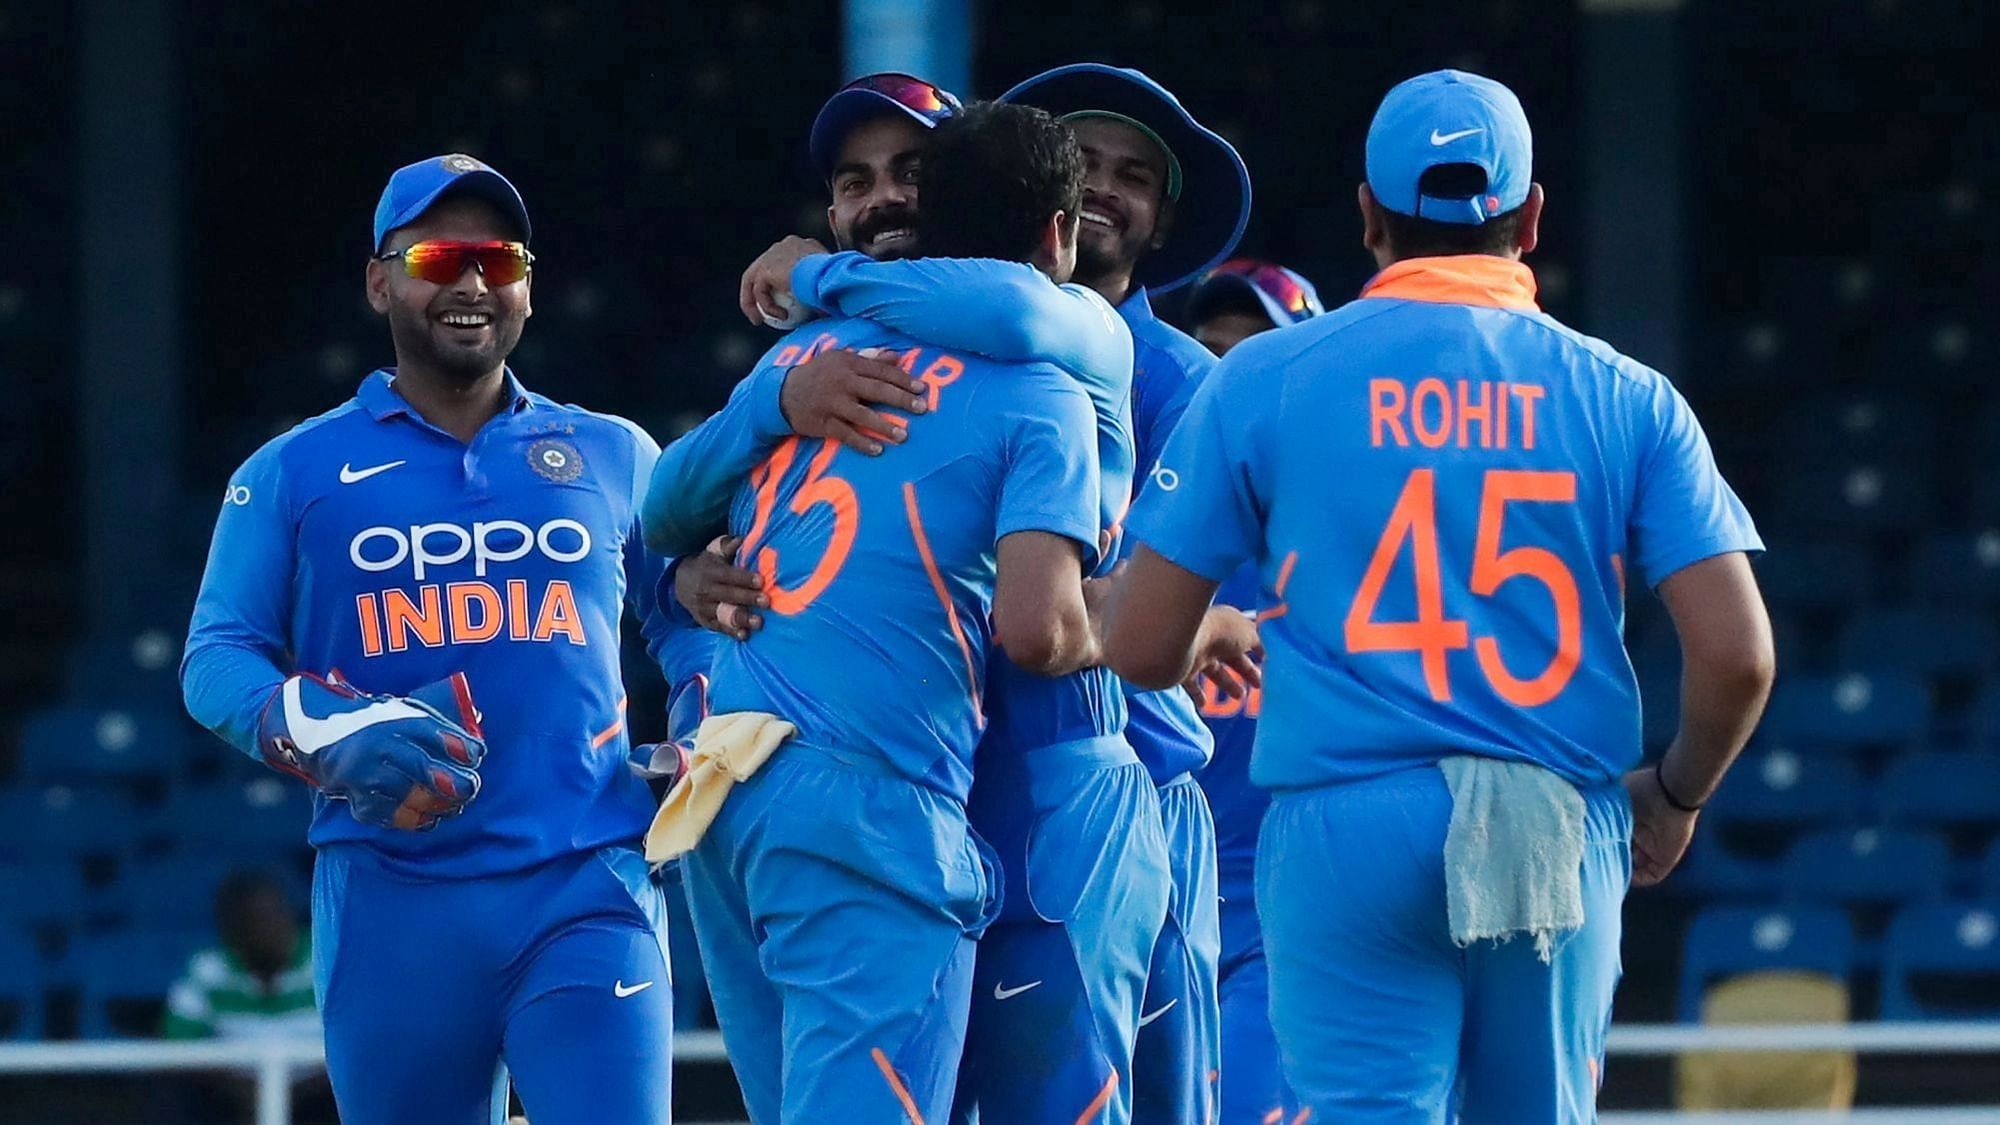 India vs West Indies 2nd ODI Live Streaming When and Where To Watch IND vs WI Match